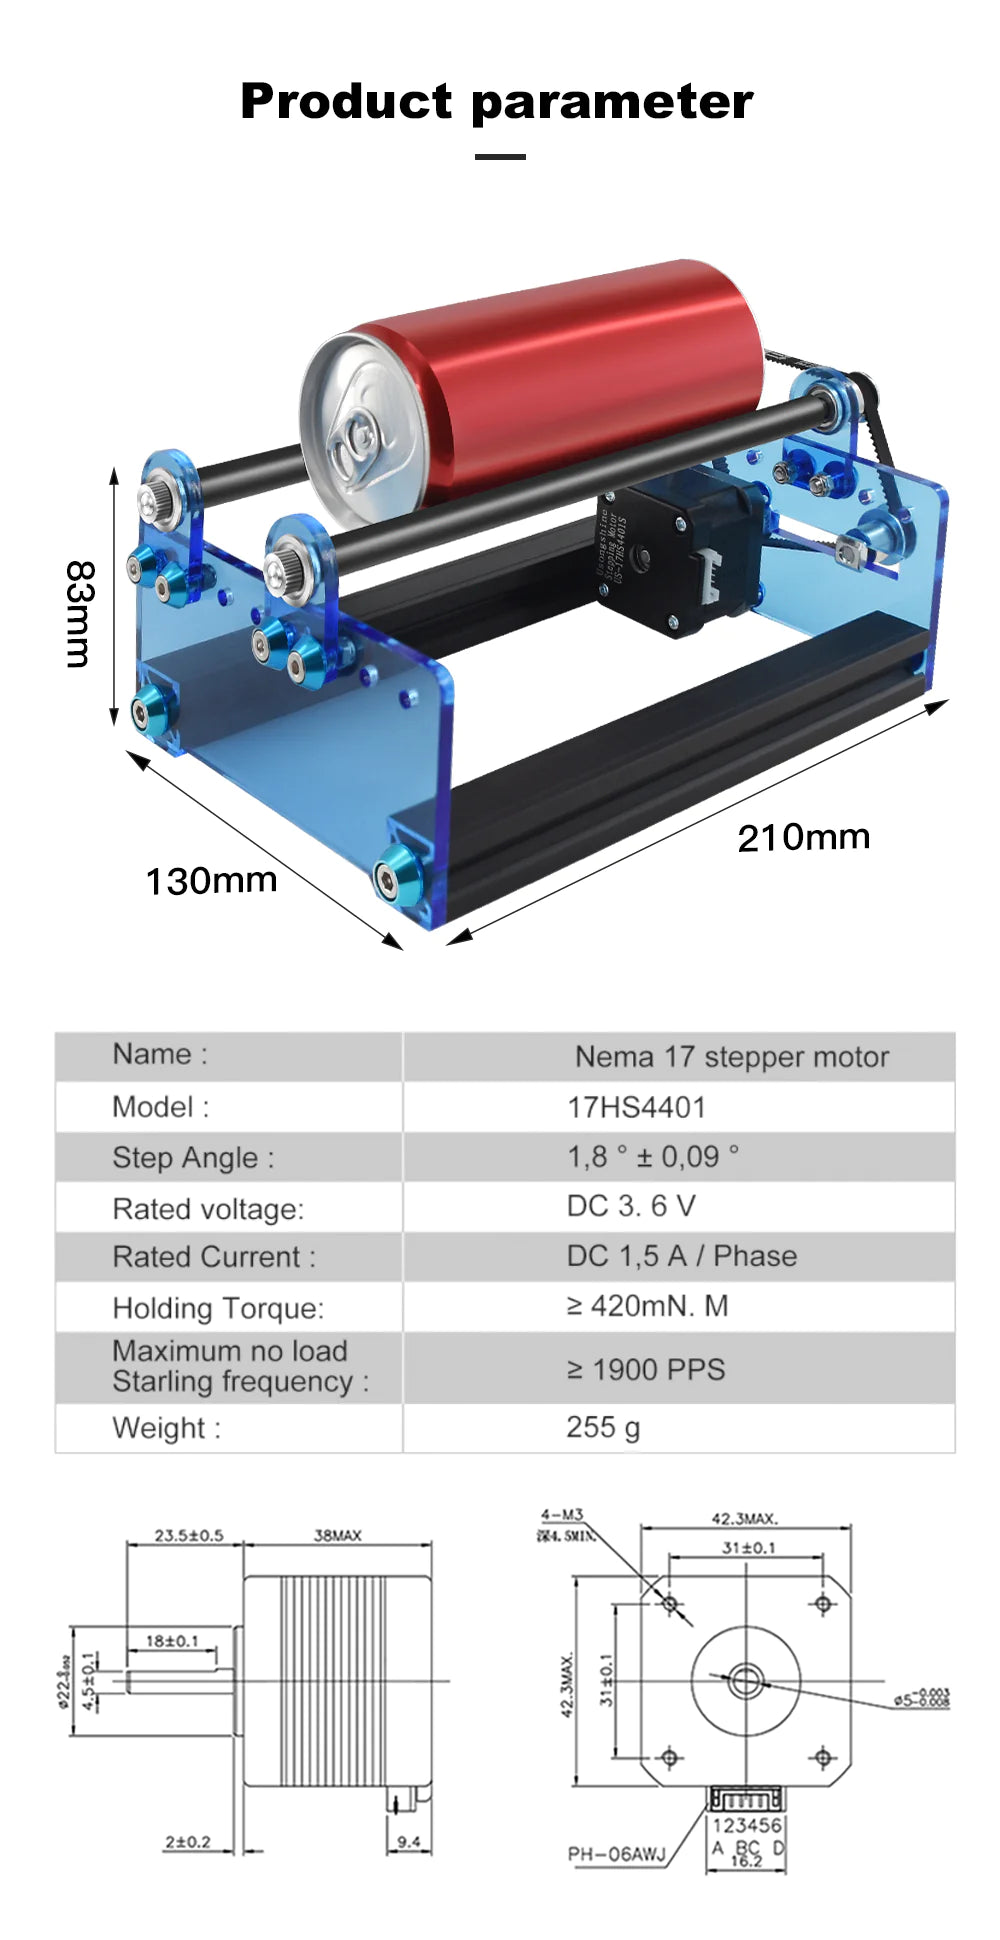 ATOMSTACK R3 Pro Laser Rotary Roller, Laser Engraver Y-axis Rotary